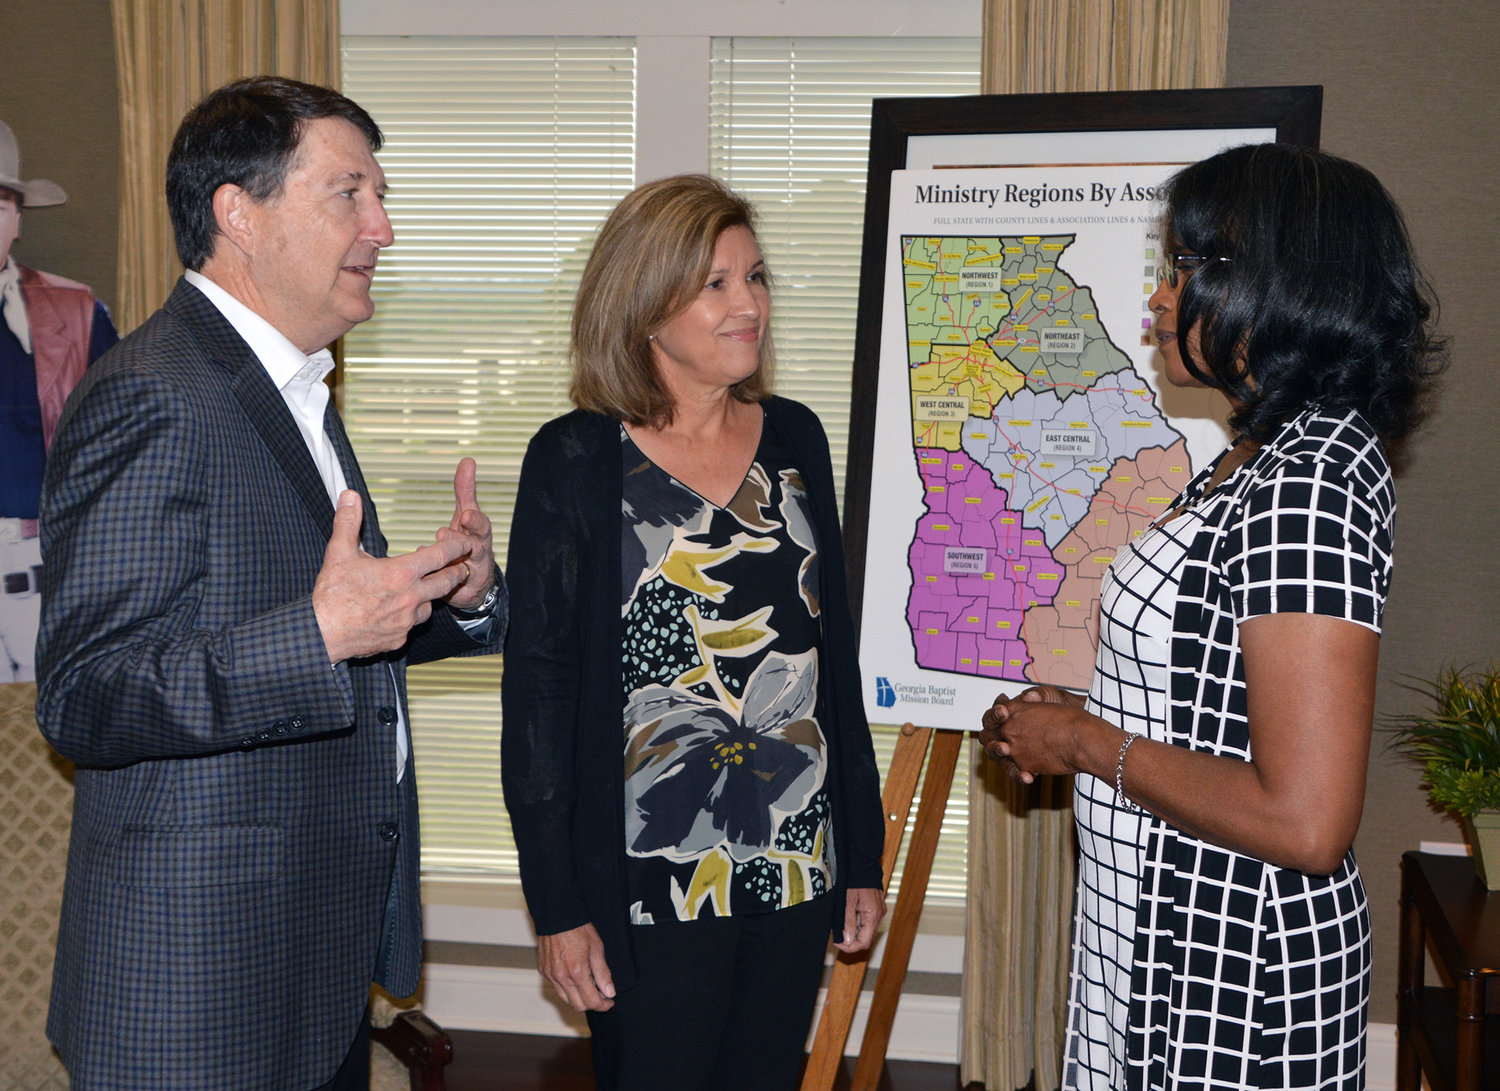 Tom Day, accompanied by his wife Martha, center, speaks with Daphne Nicely prior to a meeting at the Georgia Baptist Mission Board in Duluth, Ga., Tuesday, May 24, 2022. The Days are co-founders of The Vitamin Bridge, a nonprofit organization that’s supplying prenatal supplements to 28 organizations that minister to expectant mothers, including the The Atlanta Morning Center crisis pregnancy center. Nicely is executive director of The Atlanta Morning Center. (Index/Henry Durand)